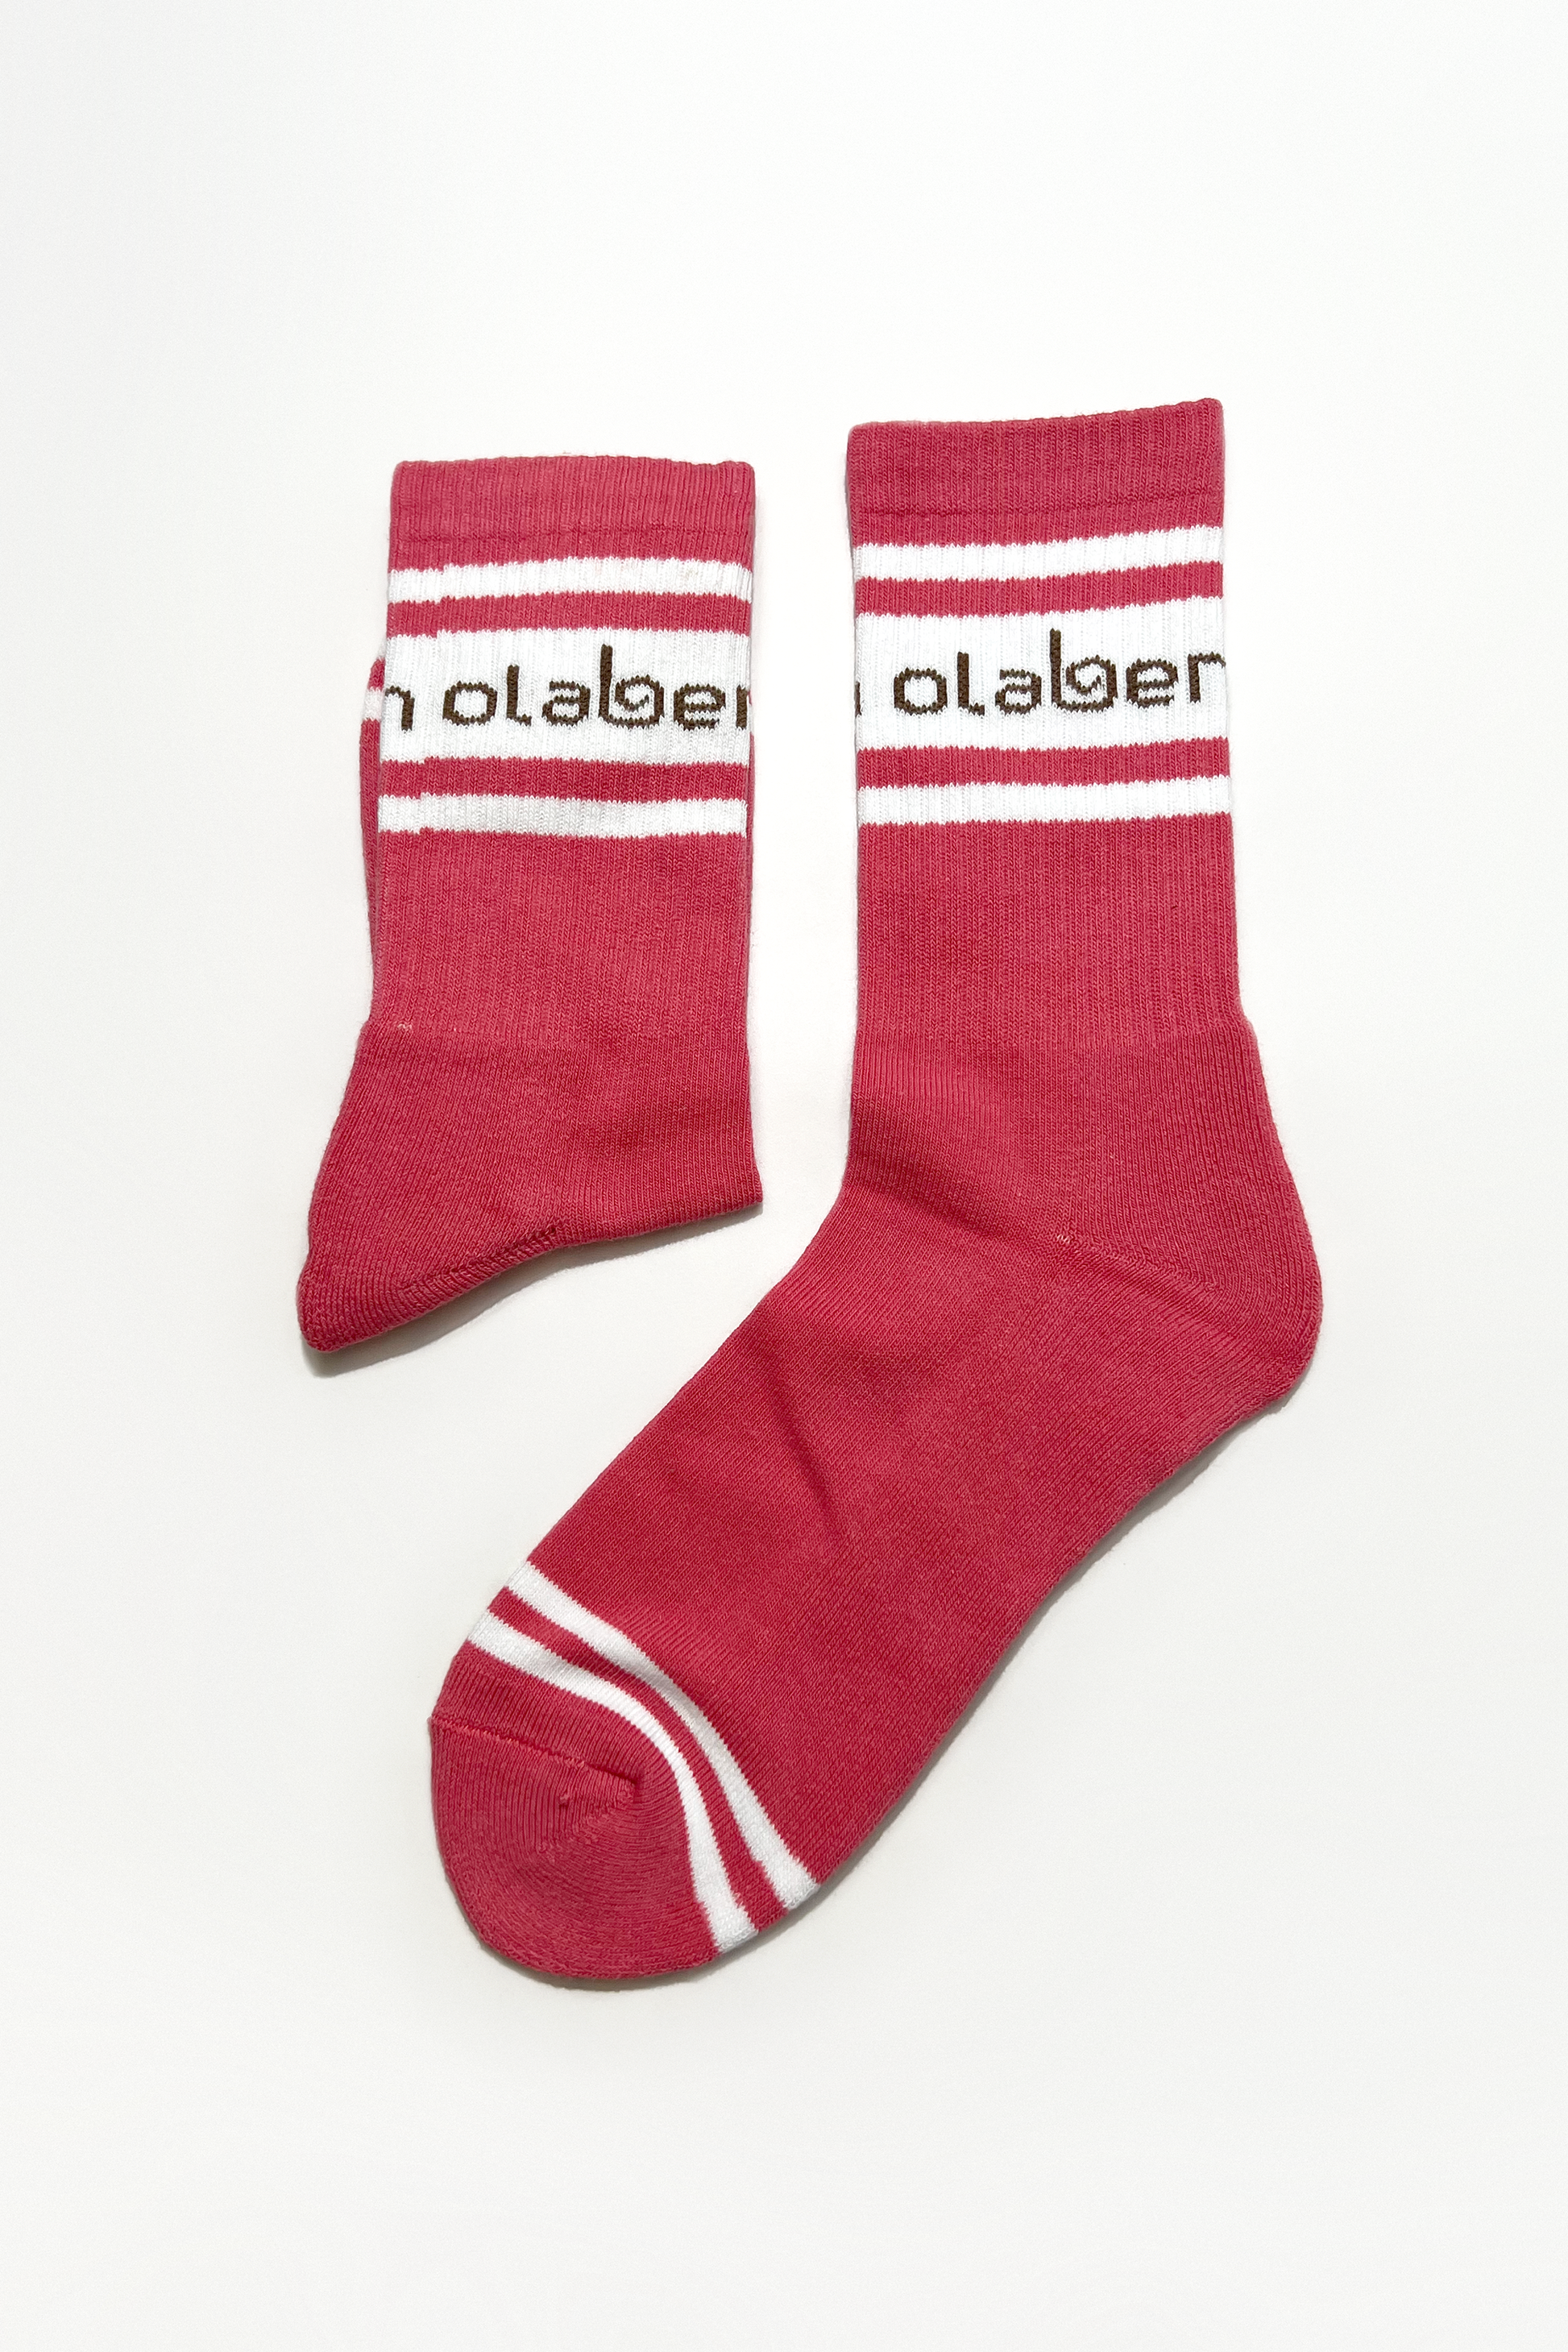 Colorful assortment of cozy quarter socks in raspberry wine and pink shades.